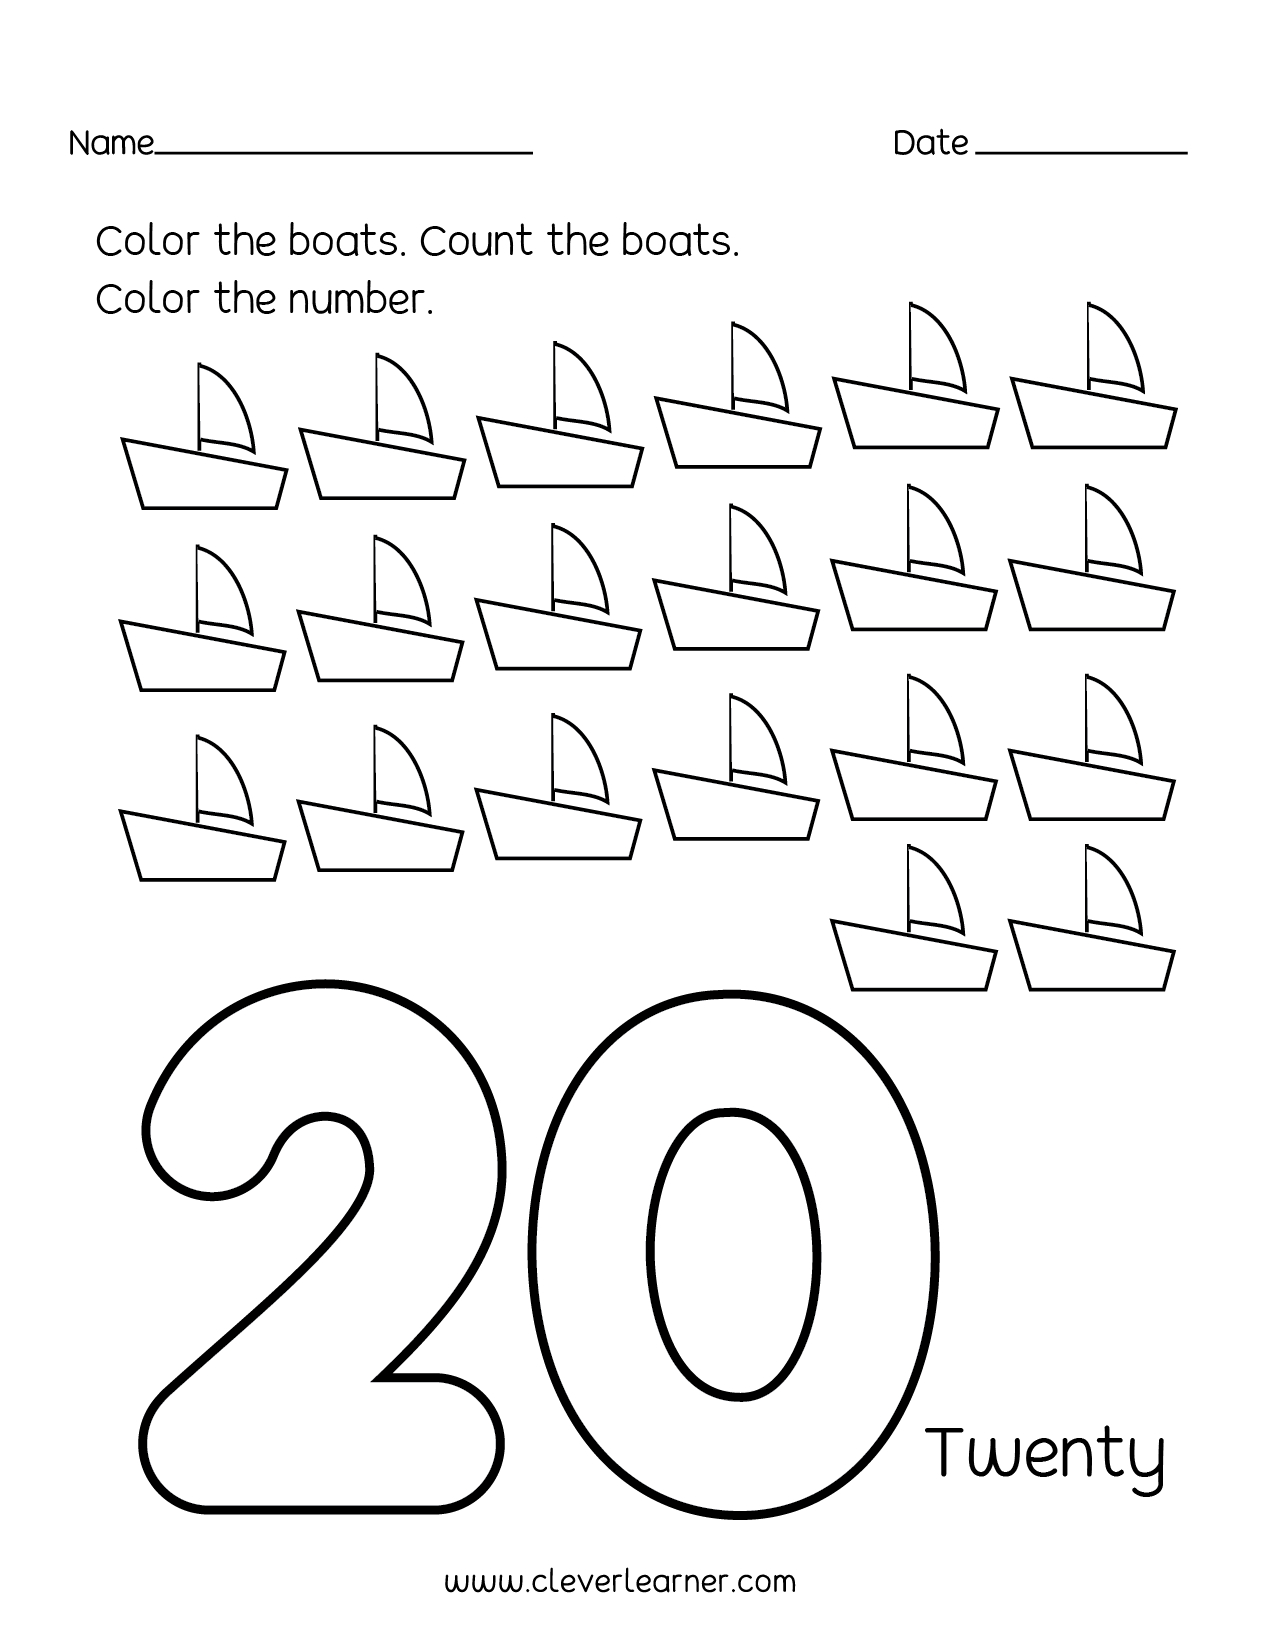 Number 20 Writing, Counting And Identification Printable Worksheets - Free Printable Counting Worksheets 1 20